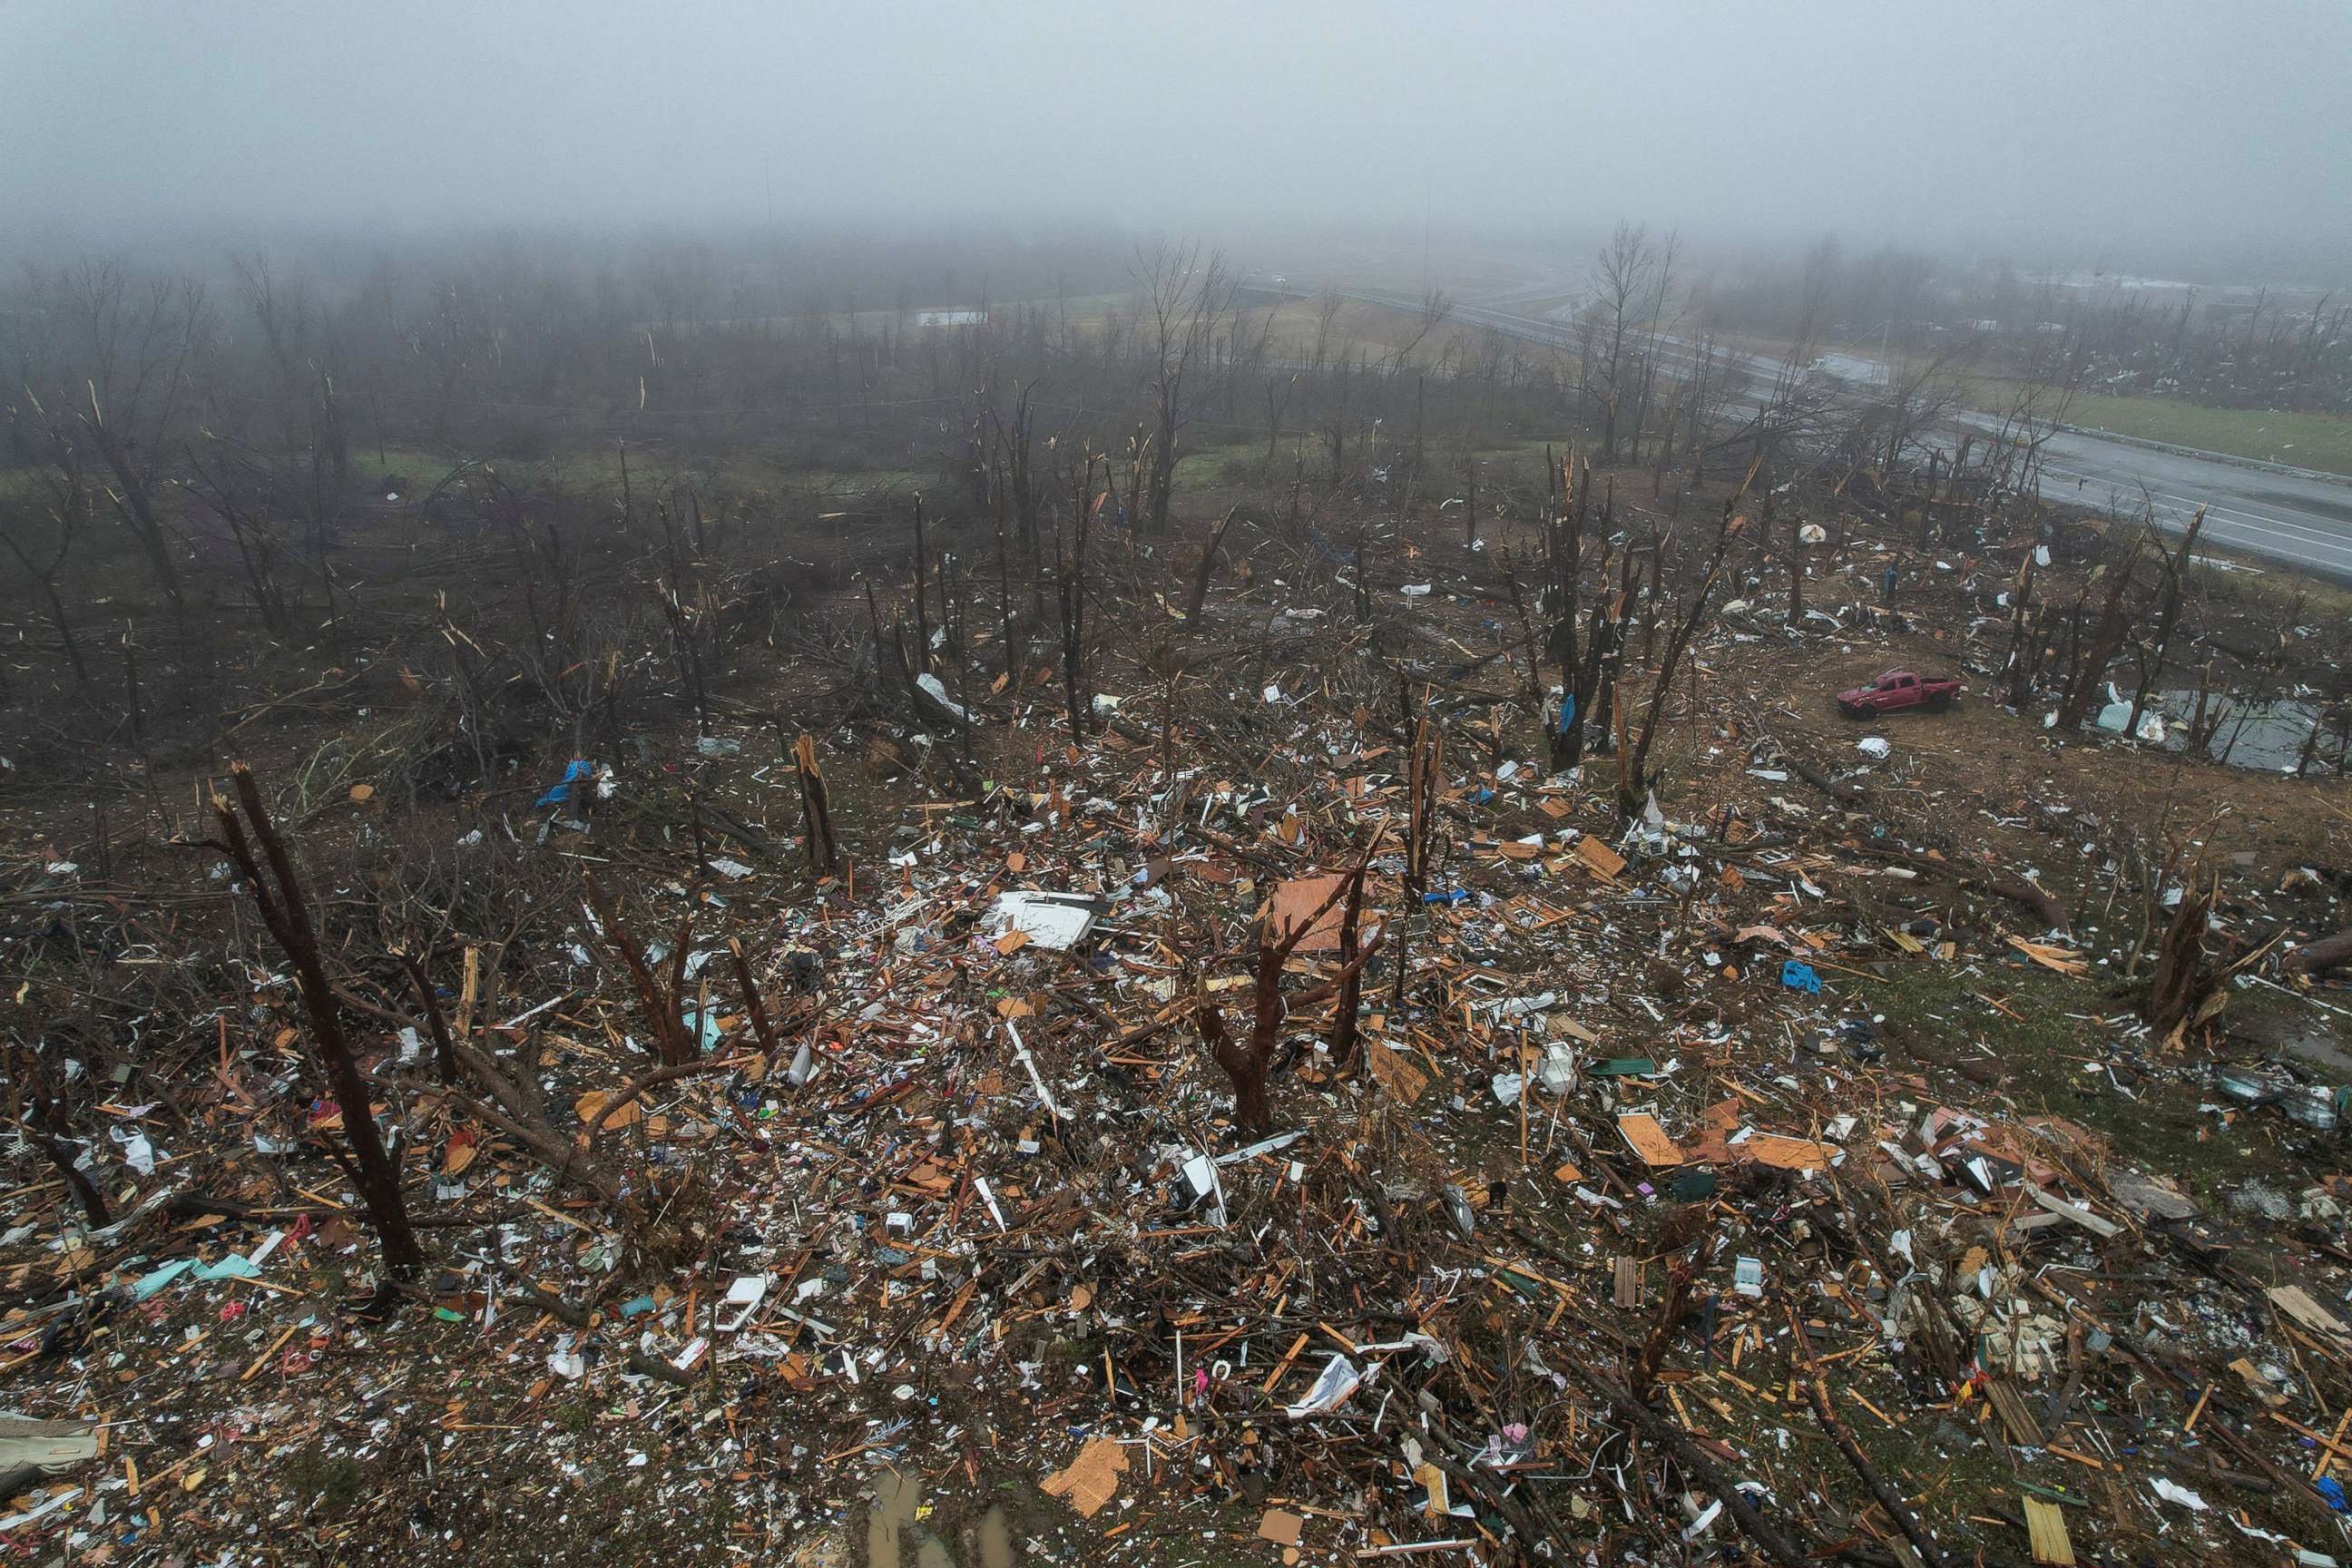 PHOTO: An aerial view of debris, including vehicles, which was swept into a forested area behind homes, following a devastating outbreak of tornadoes that ripped through several U.S. states, in Mayfield, Ky., Dec. 17, 2021.